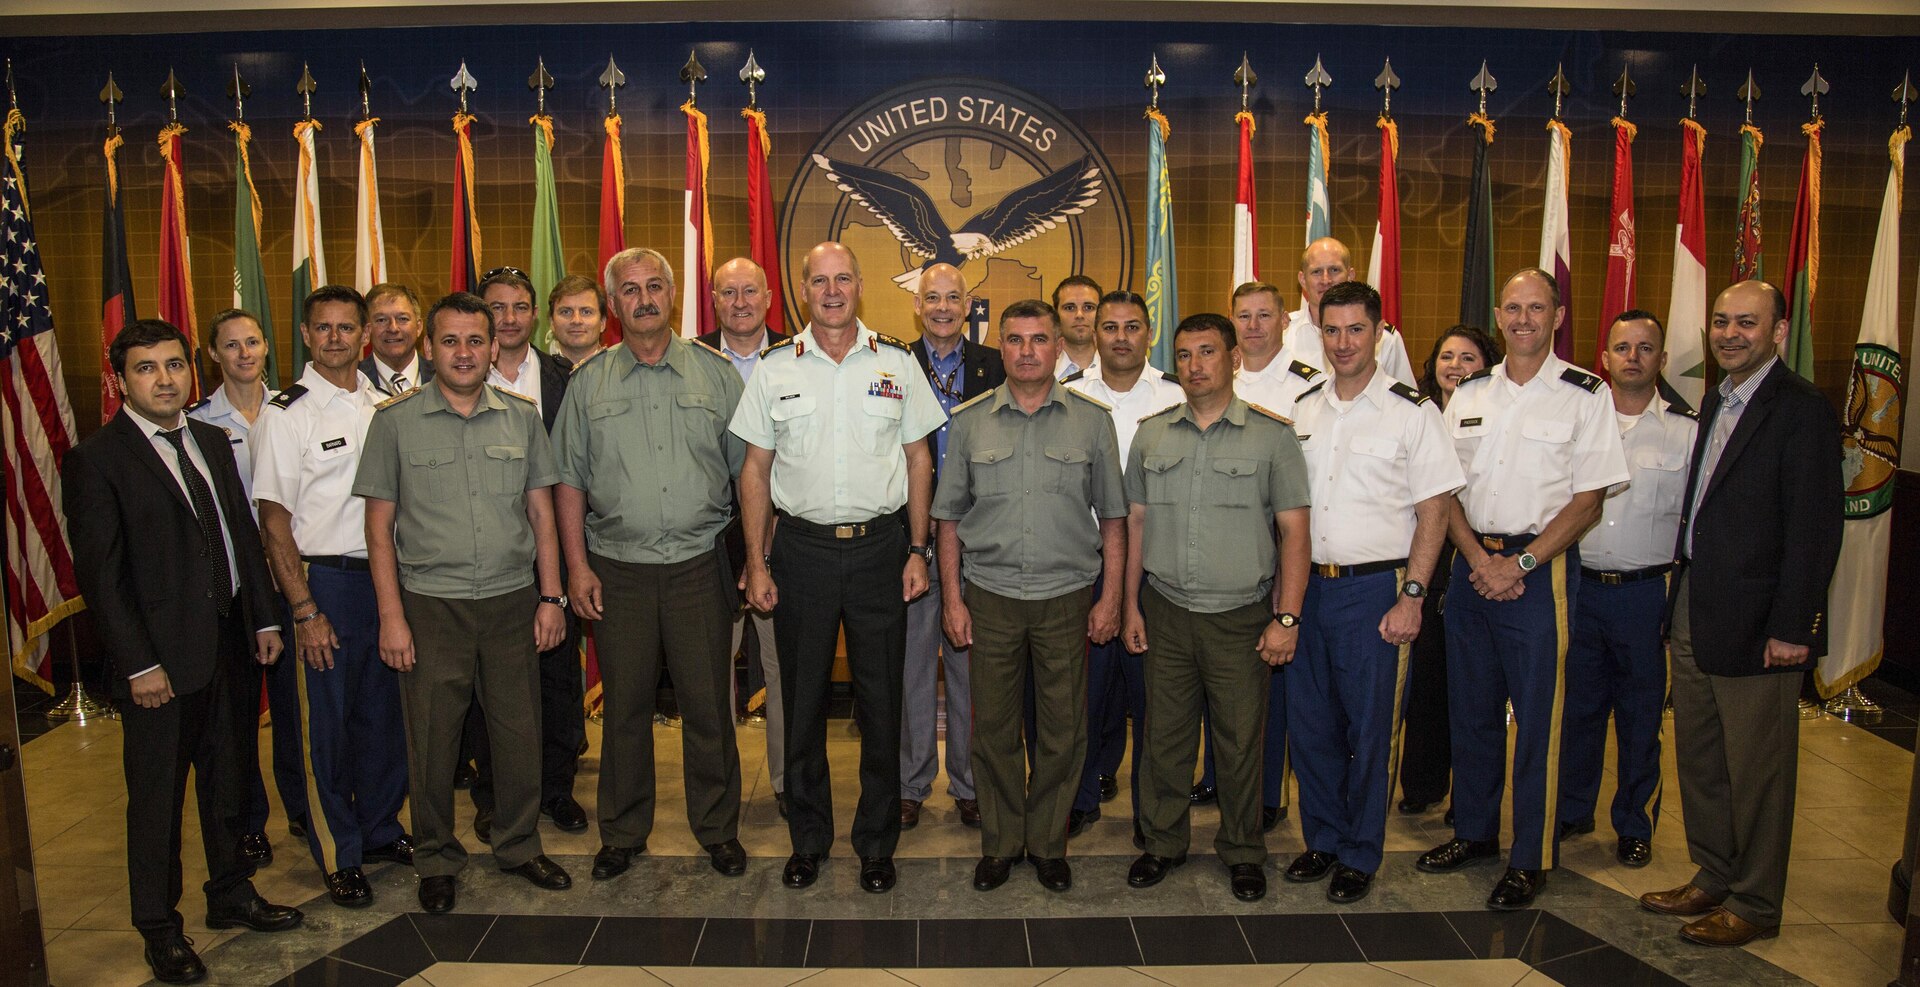 Tampa, Fla. - U.S. Central Command representatives and military officers from the Republic of Tajikistan Ministry of Defense pose for a group photo during the 2017 combined U.S.-Tajikistan consultative staff talks (CST). The talks are an annual event held in Tampa, Florida designed to review the security cooperation progress of the previous year’s military-to-military events and finalize the coming years military-to-military planning between the two partners. (Photo by Tom Gagnier)